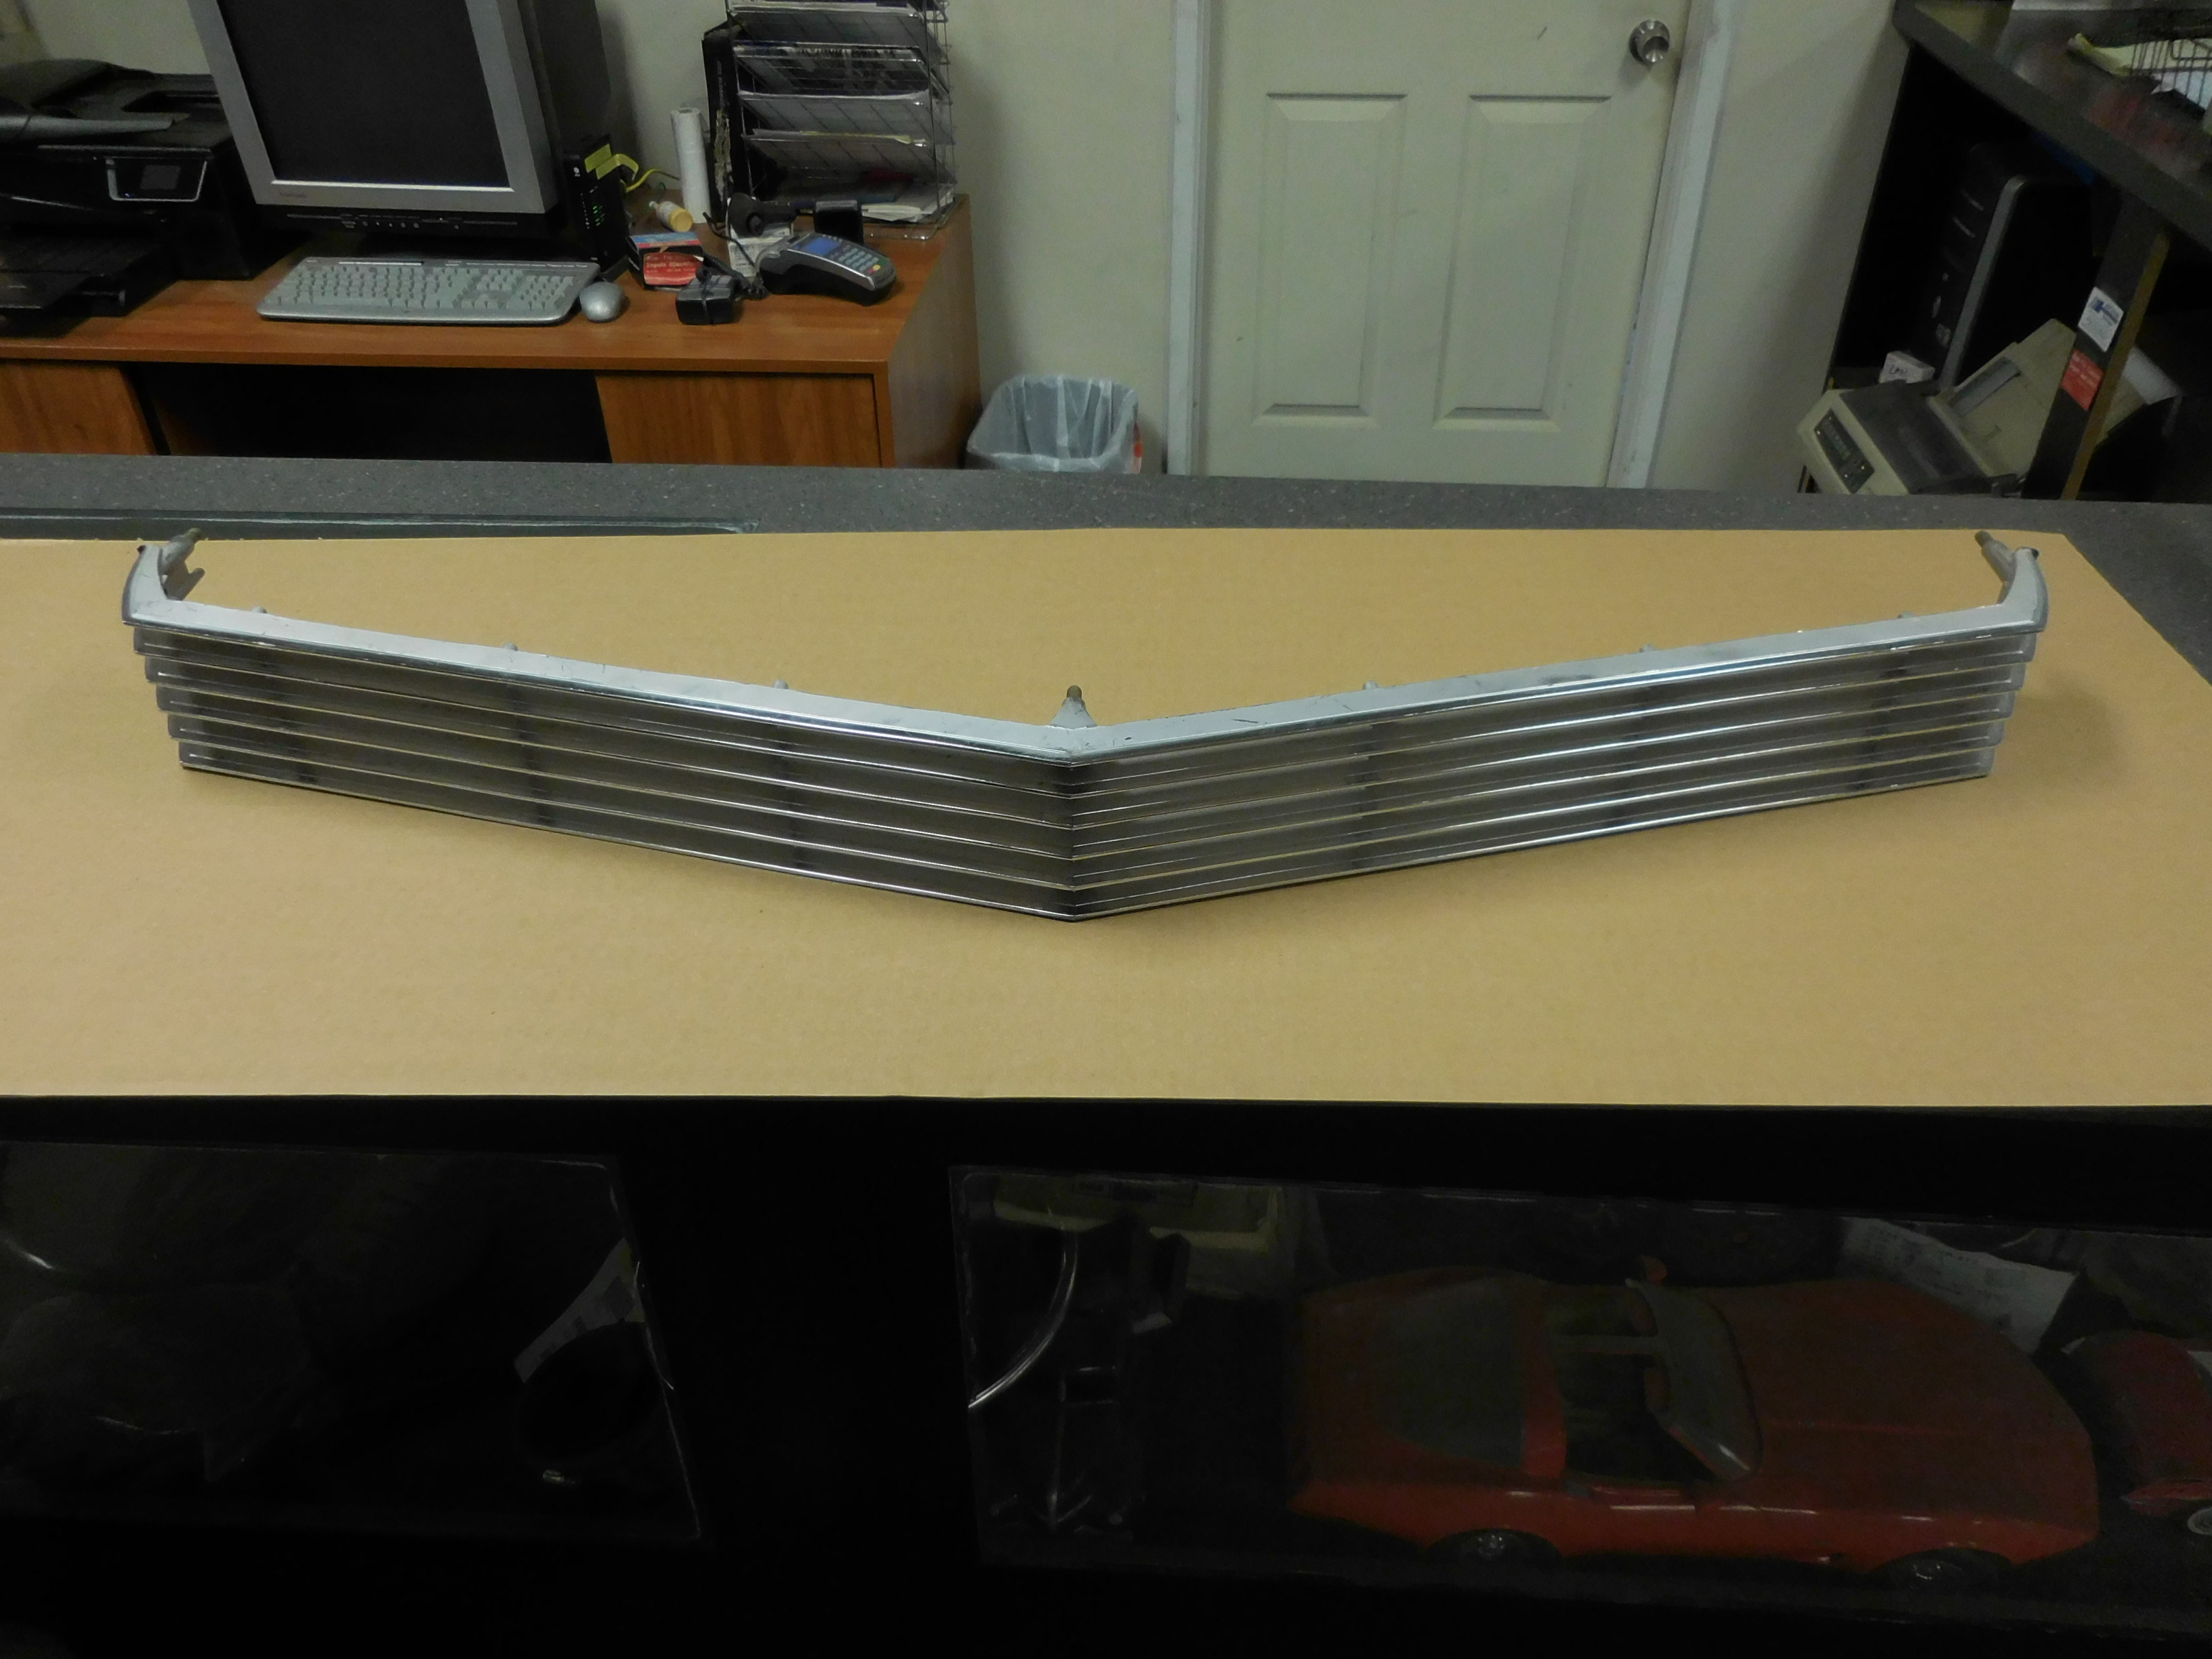 1972 Buick LeSabre Electra grill. Call for details 209-462-4300.